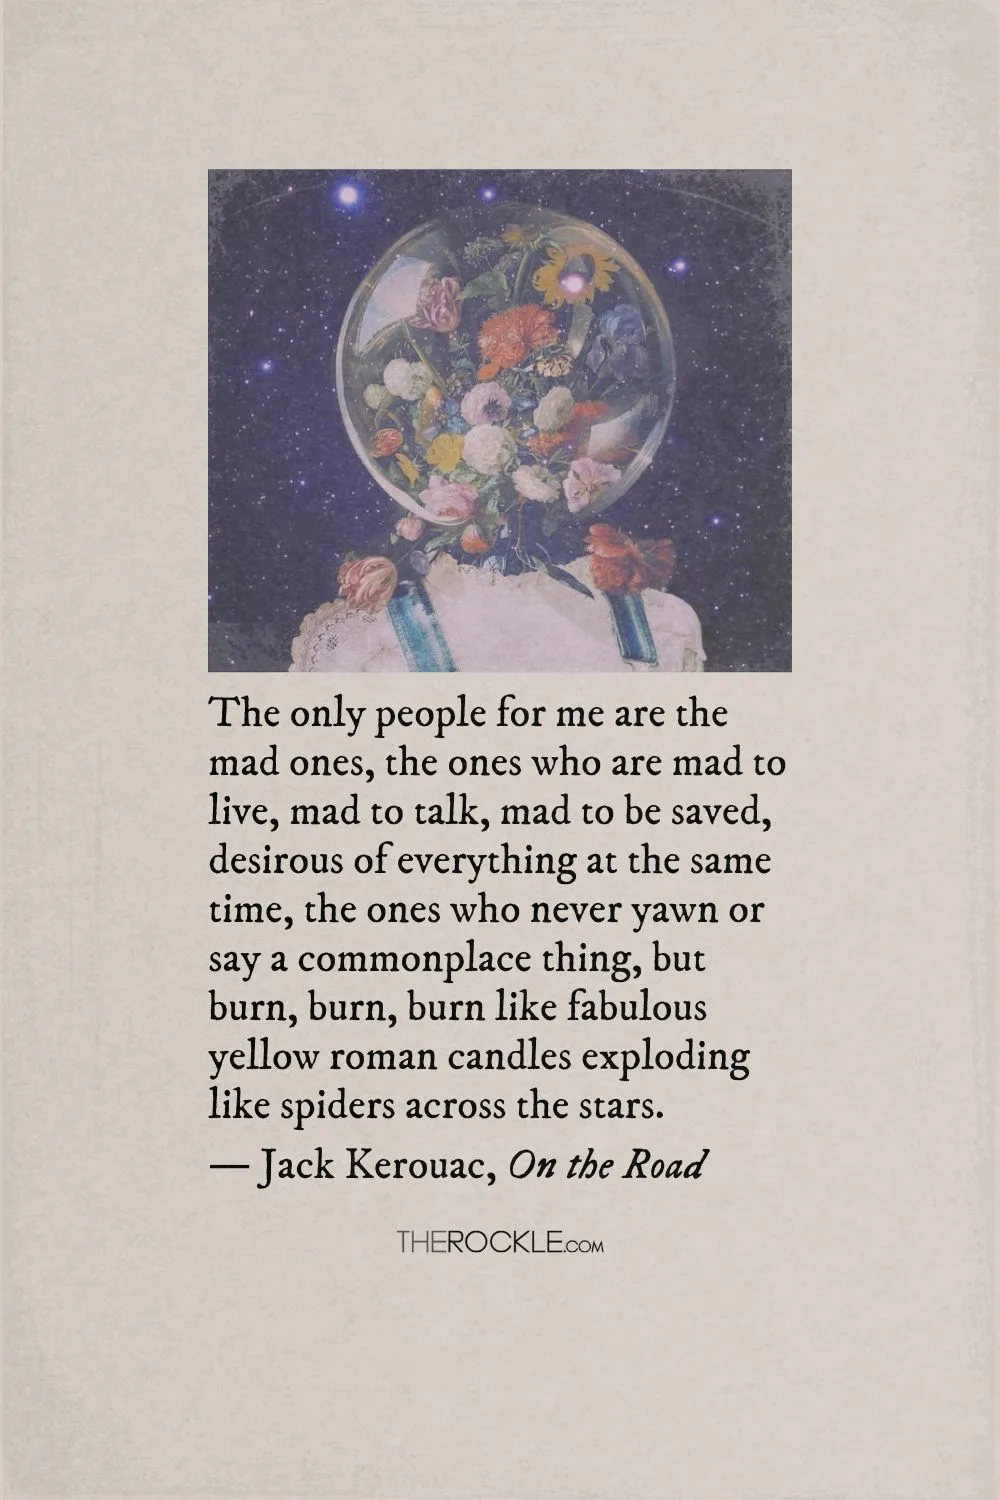 Jack Kerouac's quote about about passionate and adventurous people